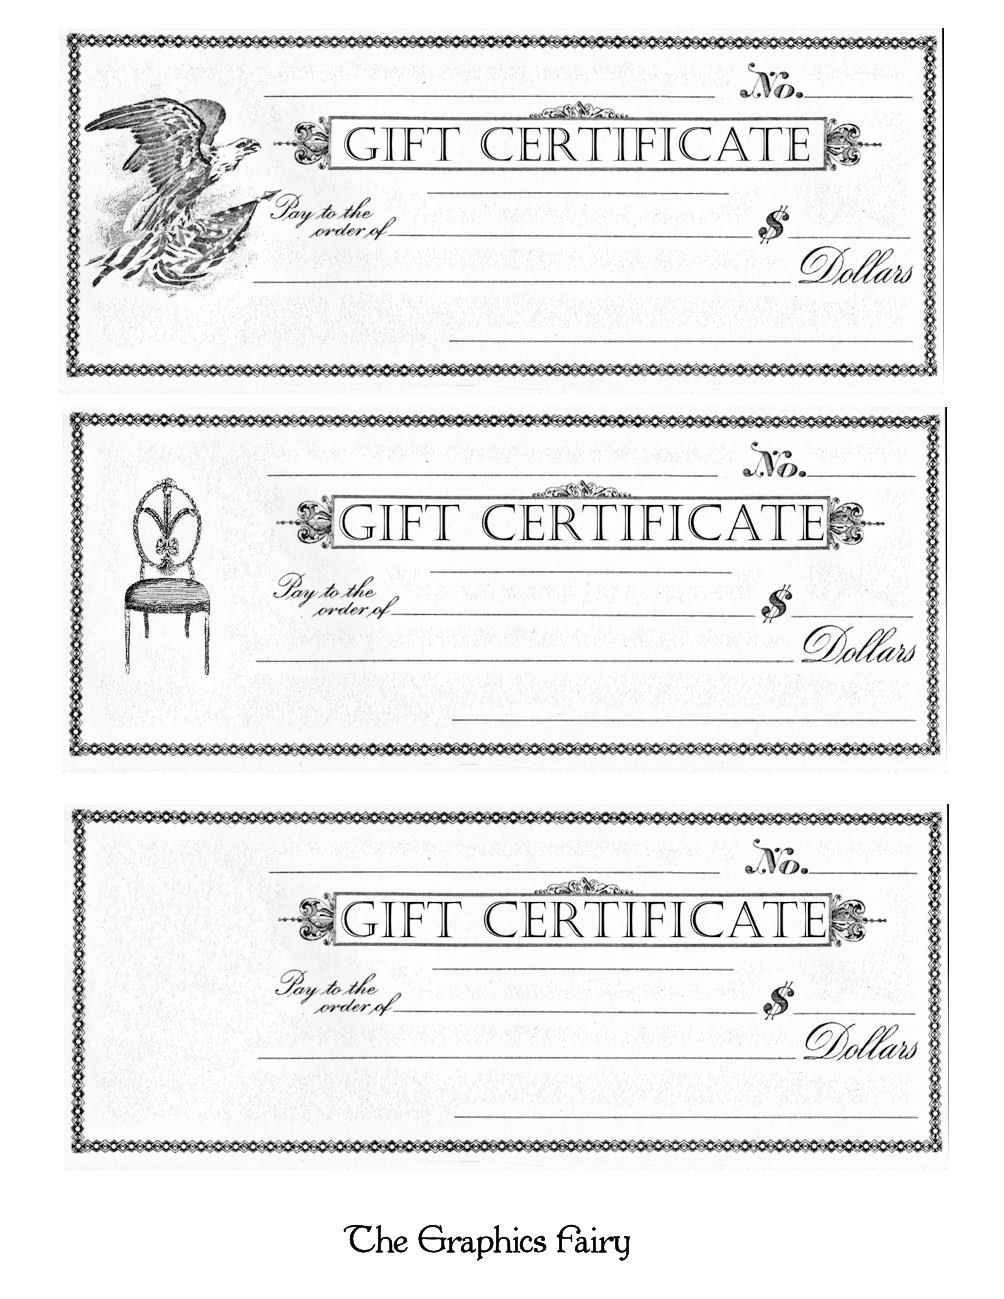 Blank Gift Certificate Template Free Printable - FREE PRINTABLE TEMPLATES